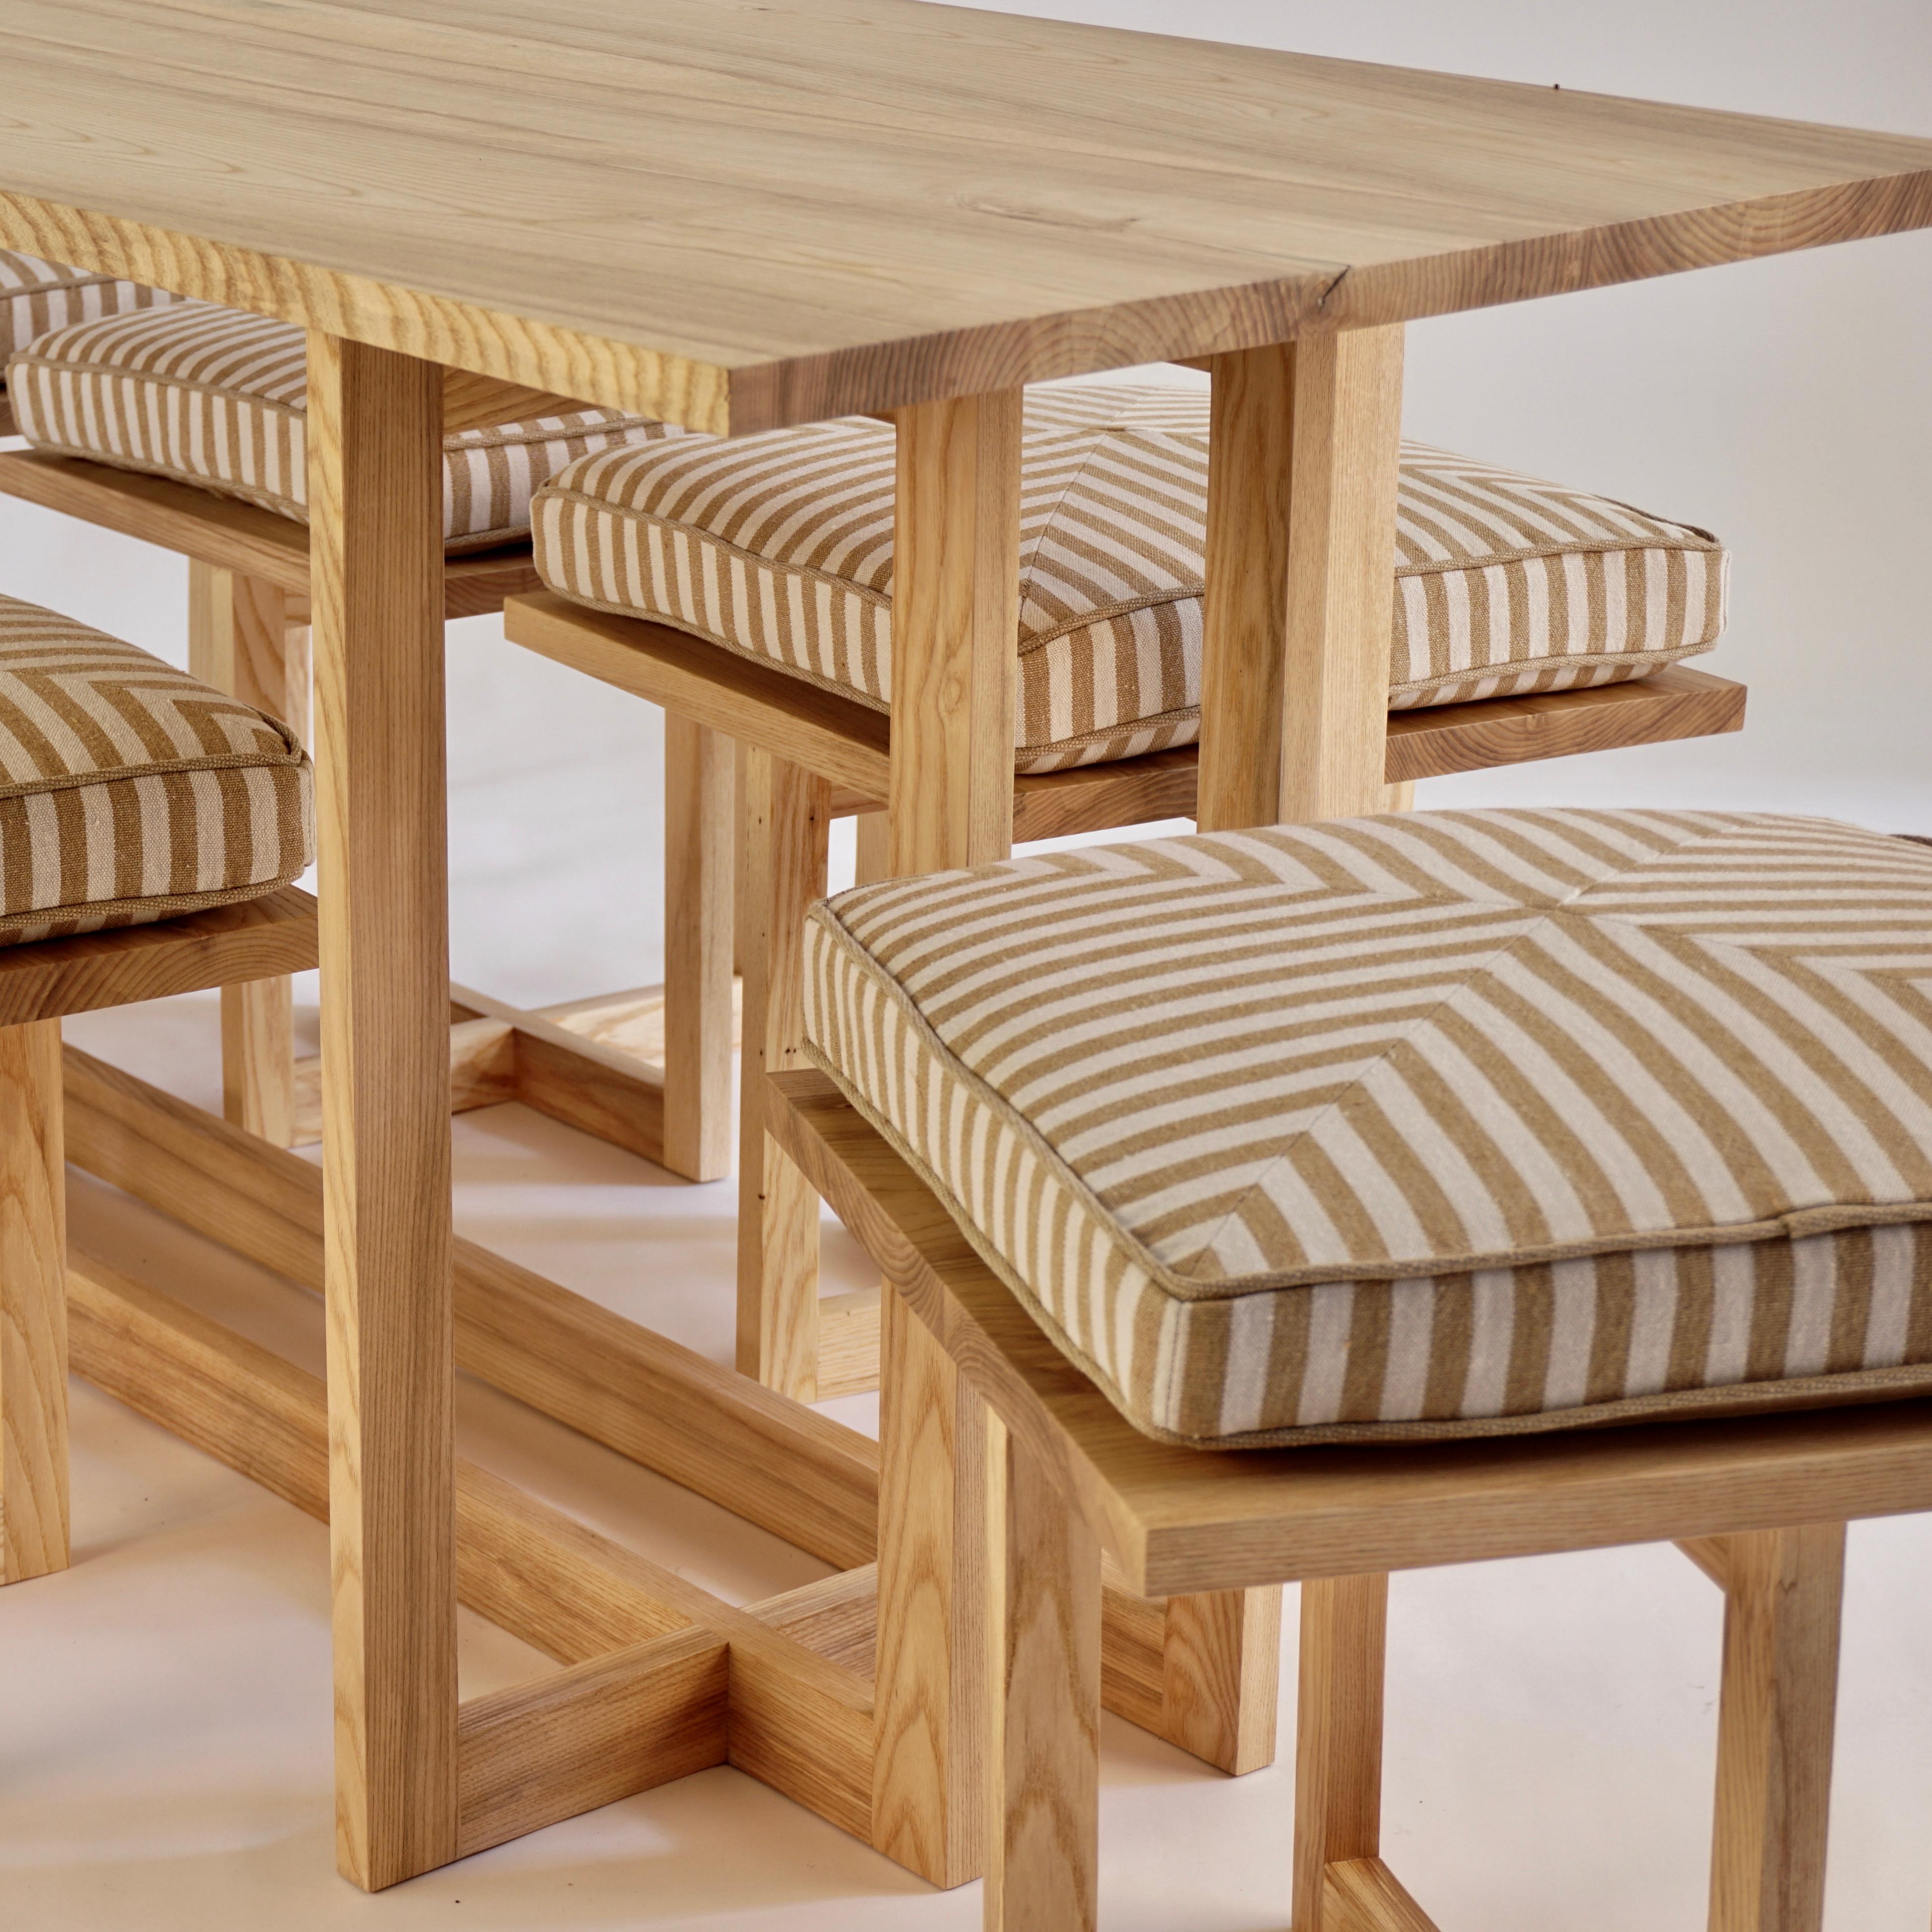 This pair of Ash Grid Stools, by Chris Lehrecke, are from a recent run of grid stools made from ash milled on Chris Lehrecke's property in the Hudson Valley. These are an original design from 2007 Grid Collection. The cushions, in a beautiful